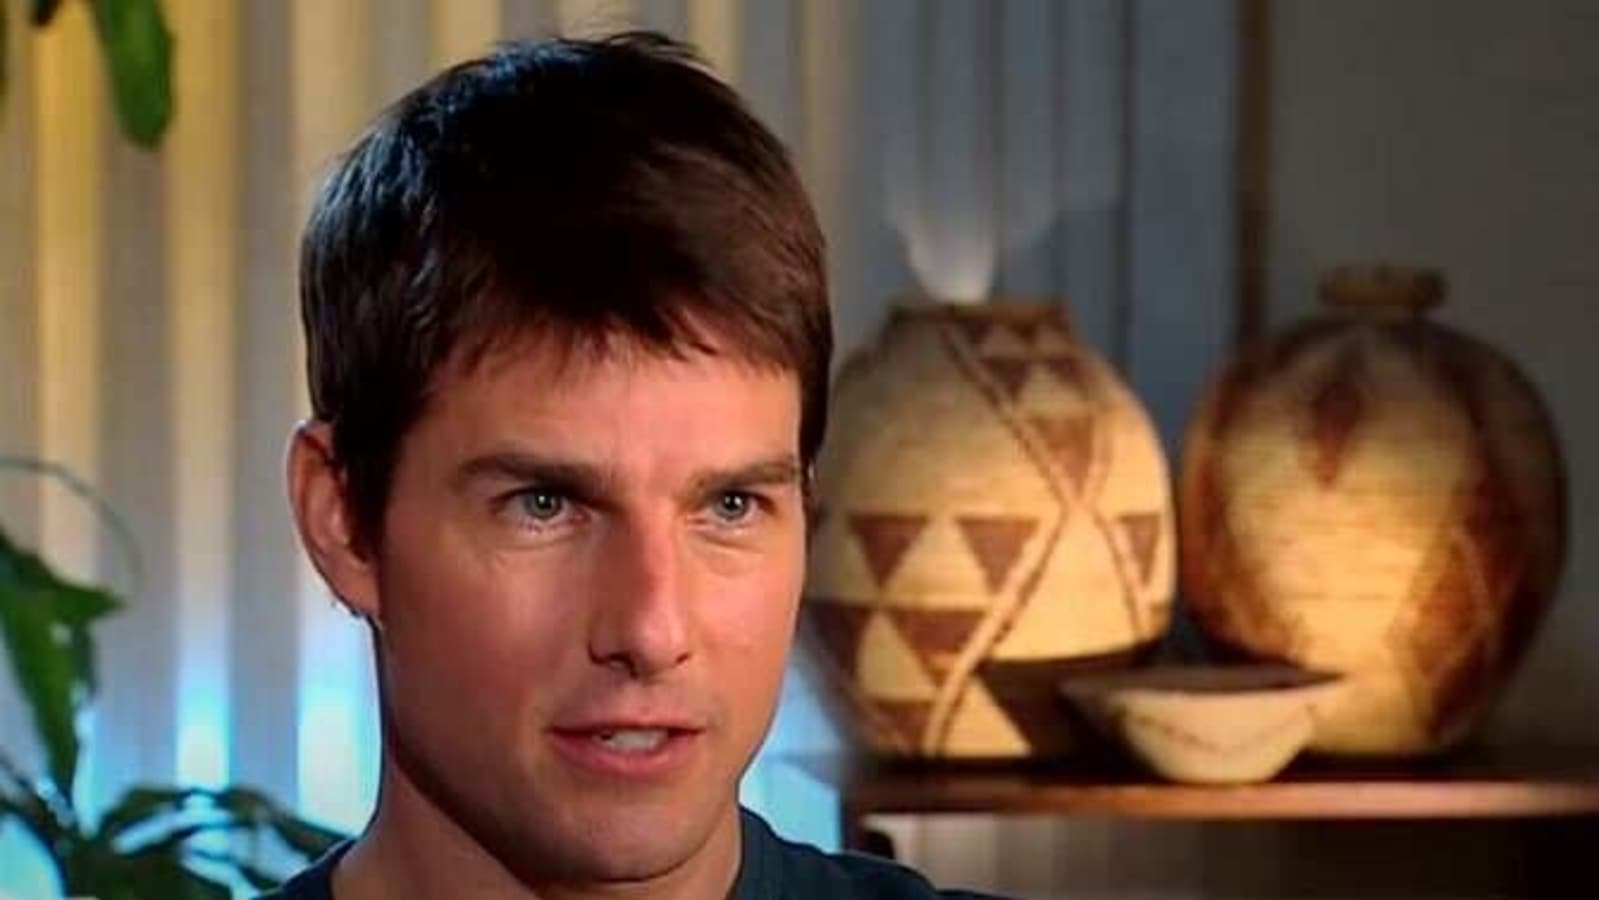 When Tom Cruise lost his cool with interviewer, said 'you're stepping